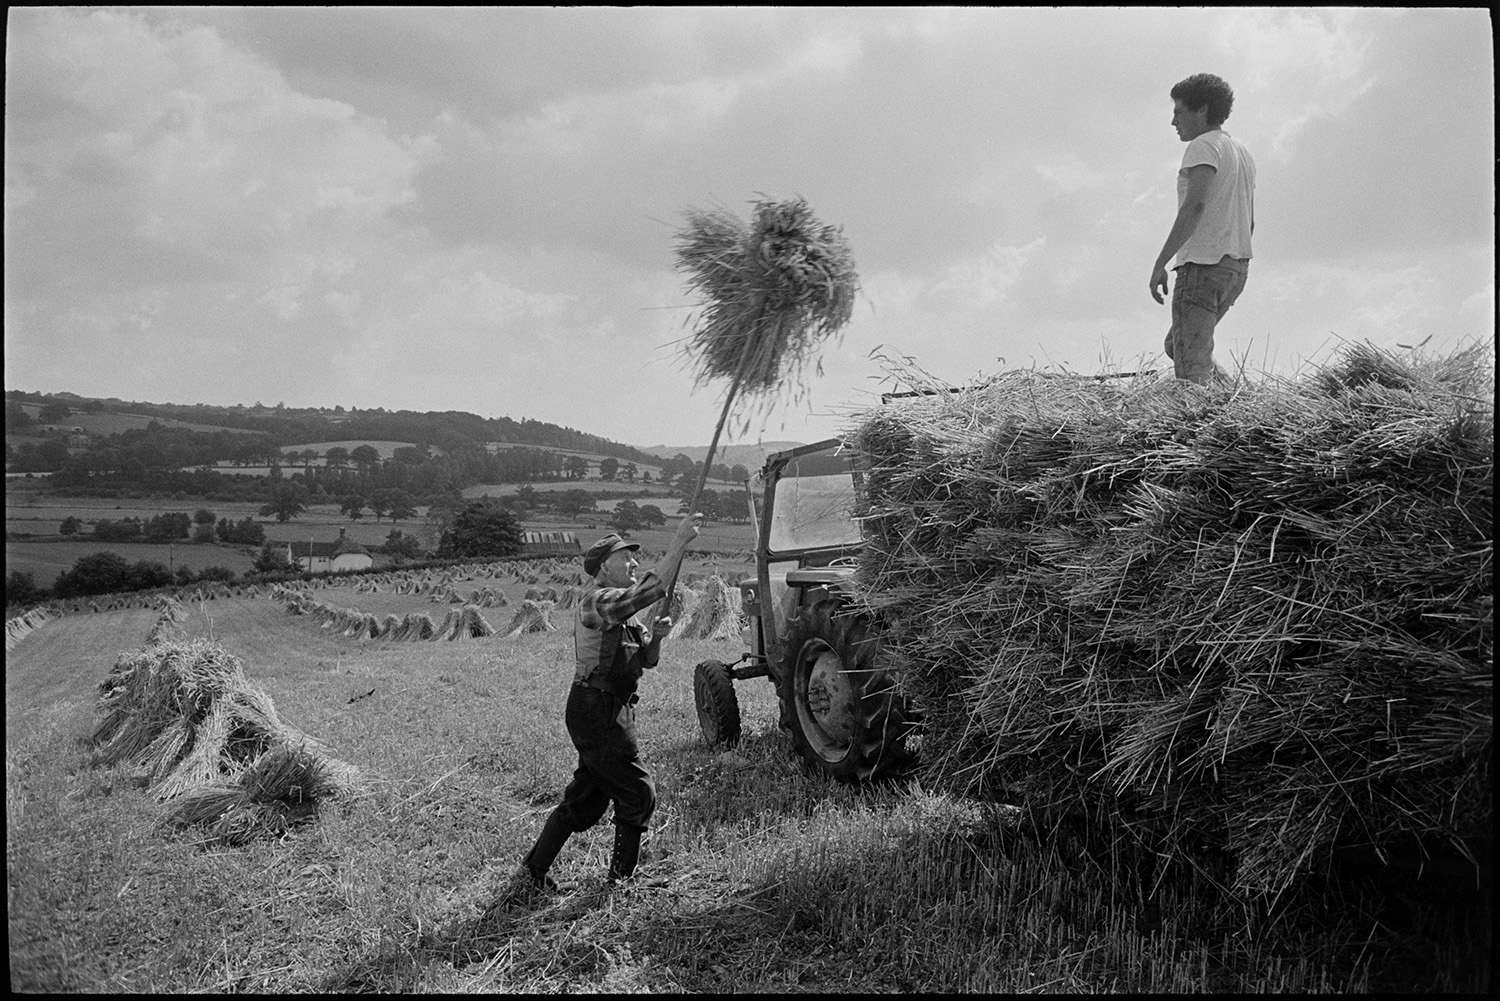 Men building wheatrick in harvest field.
[Men, possibly from the Cole family, loading stooks of corn or wheat onto a trailer using a pitchfork in a field at Ashreigney. Views of hills, fields and trees are visible in the distance.]